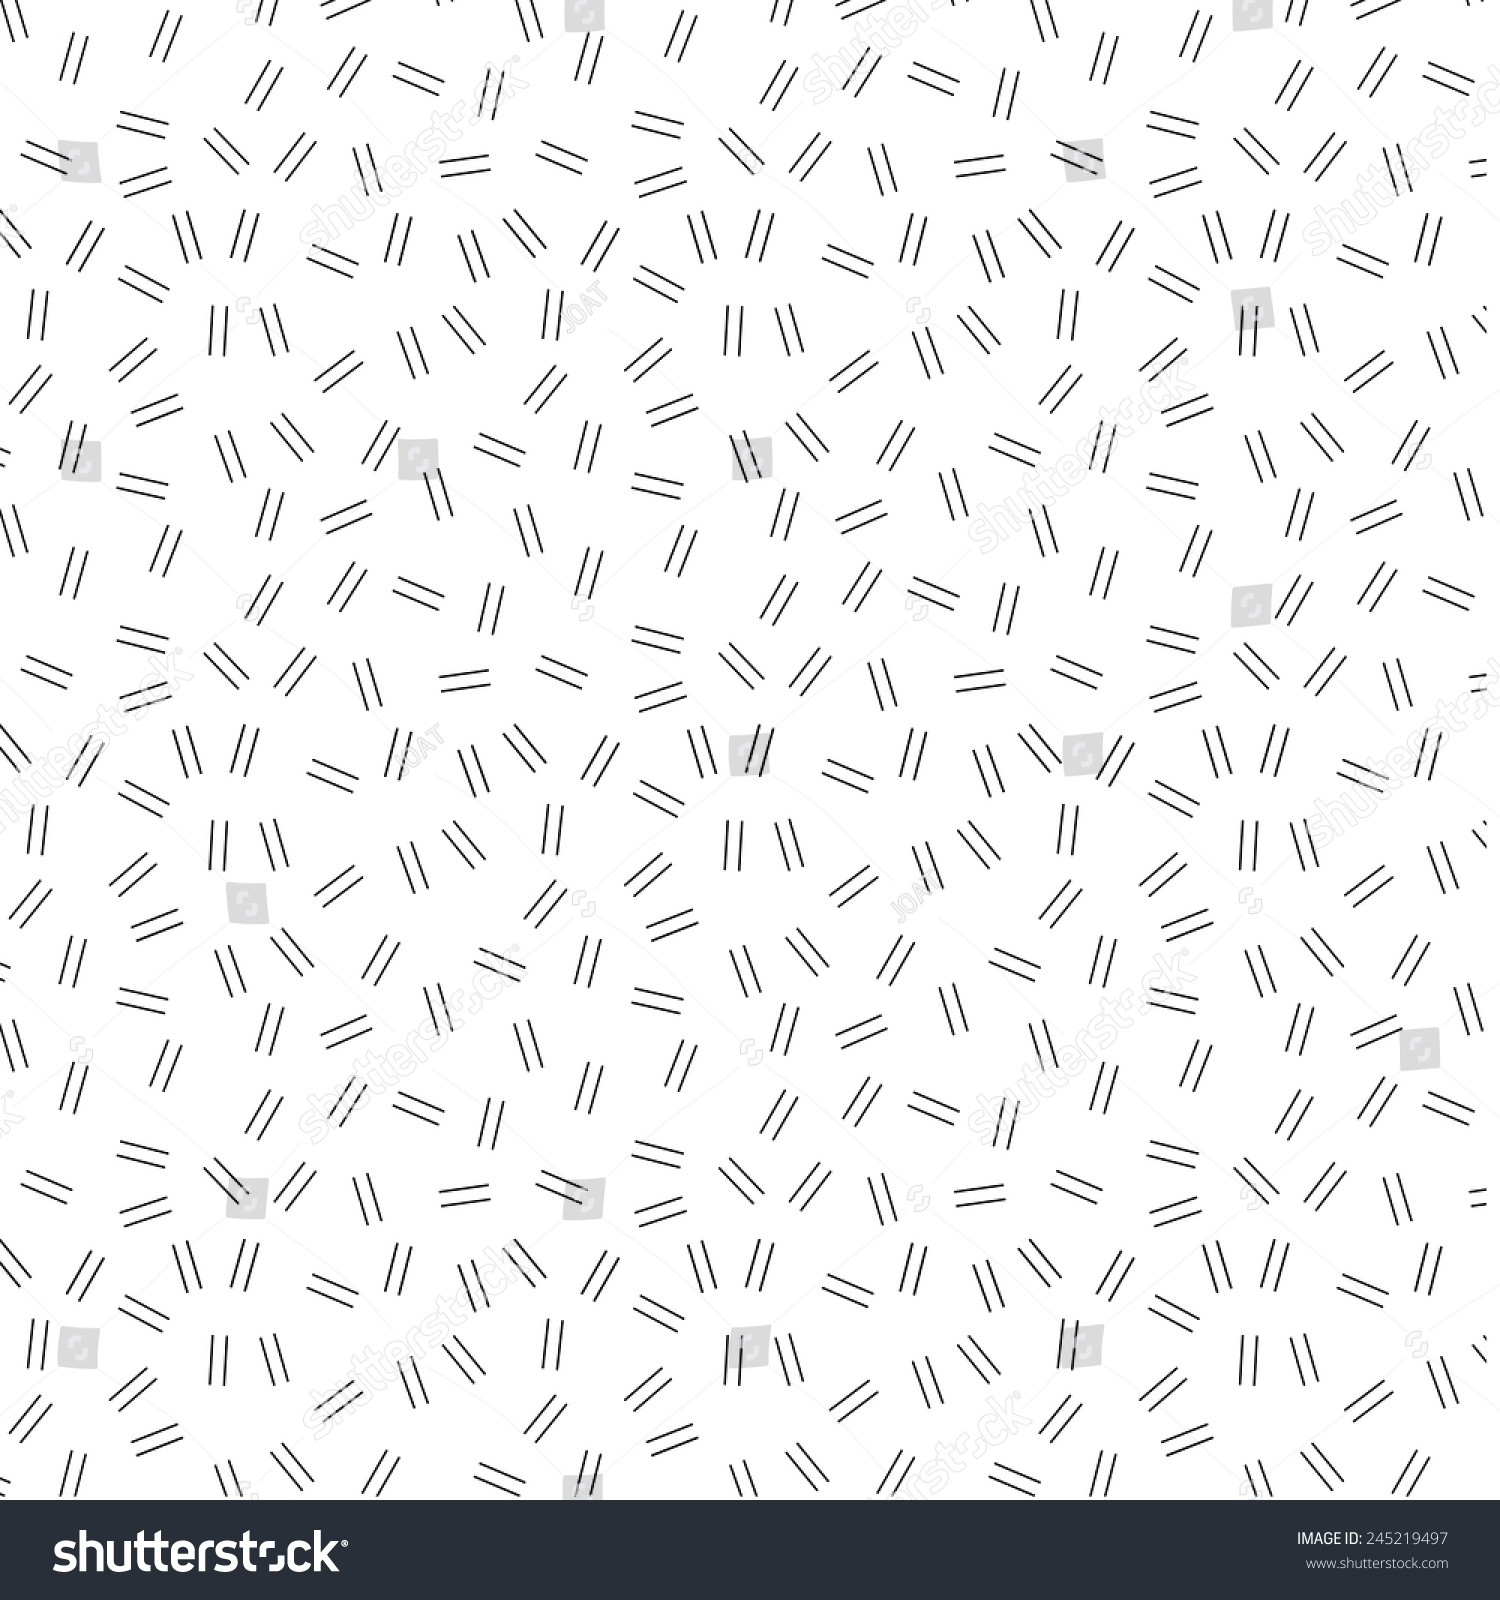 Random Placement Fine Lines Black White Stock Vector (Royalty Free ...